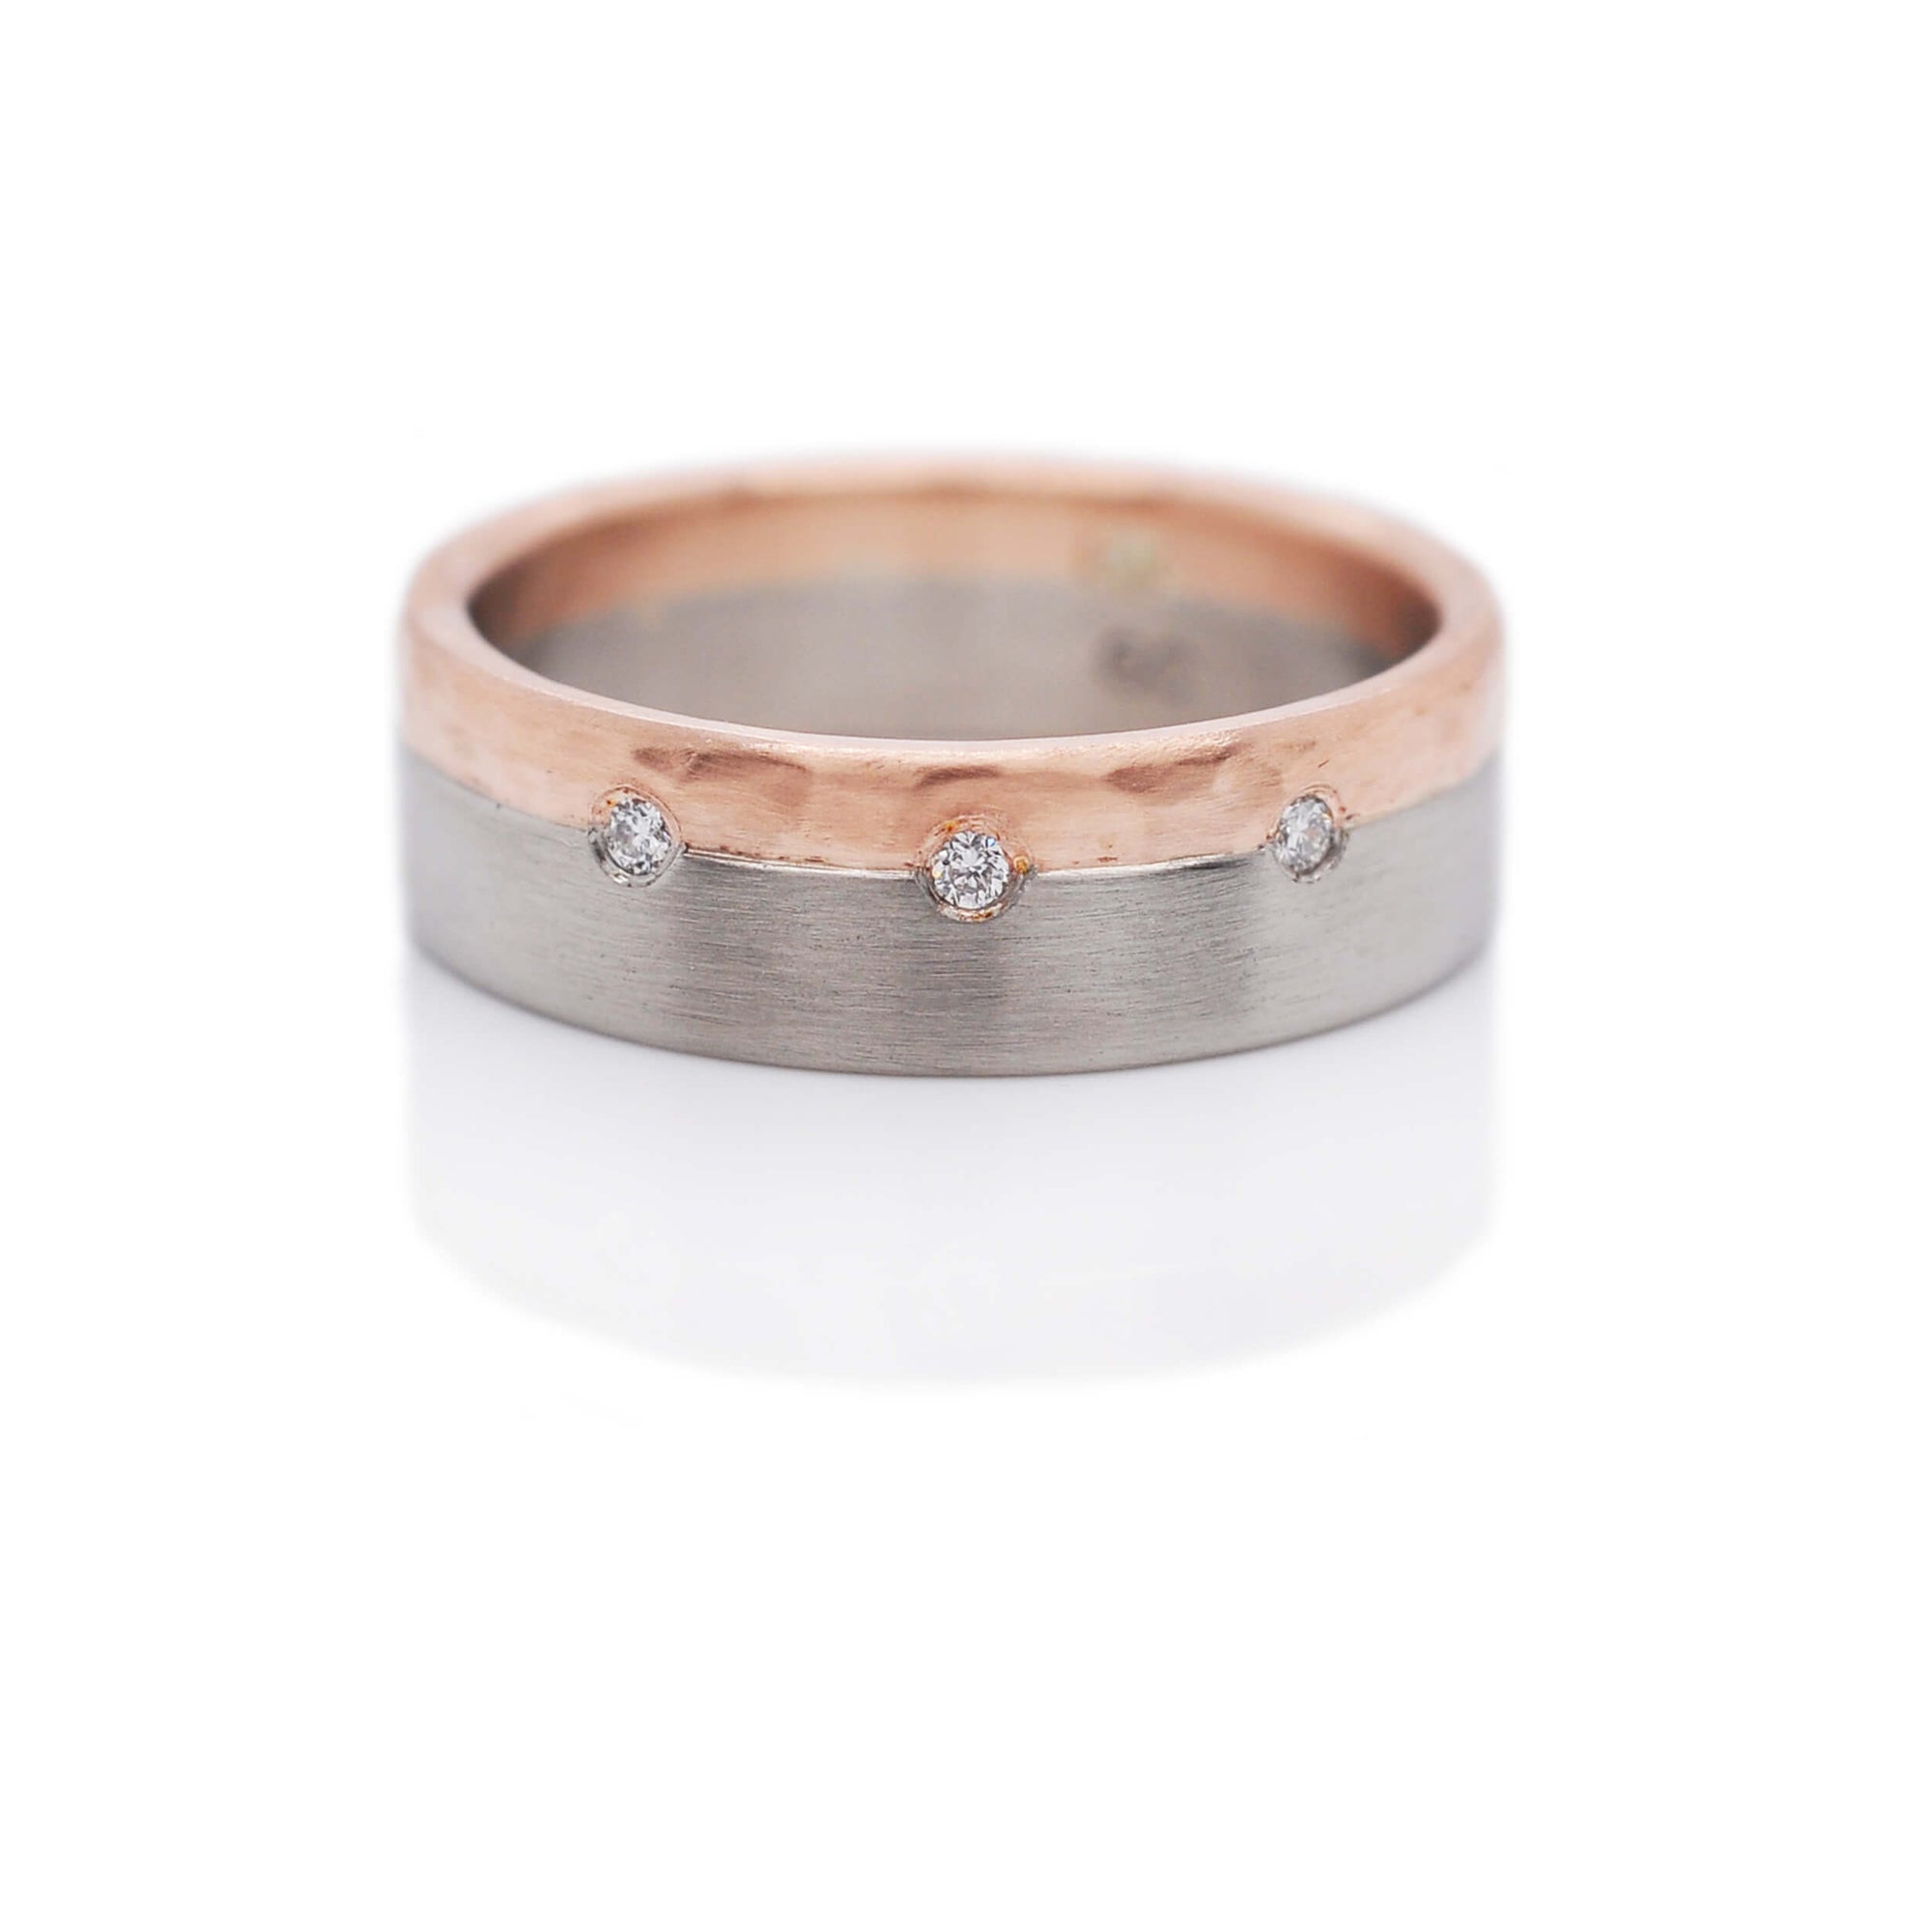 Rose gold and palladium diamond band from EC Design Jewelry in Minneapolis, MN.